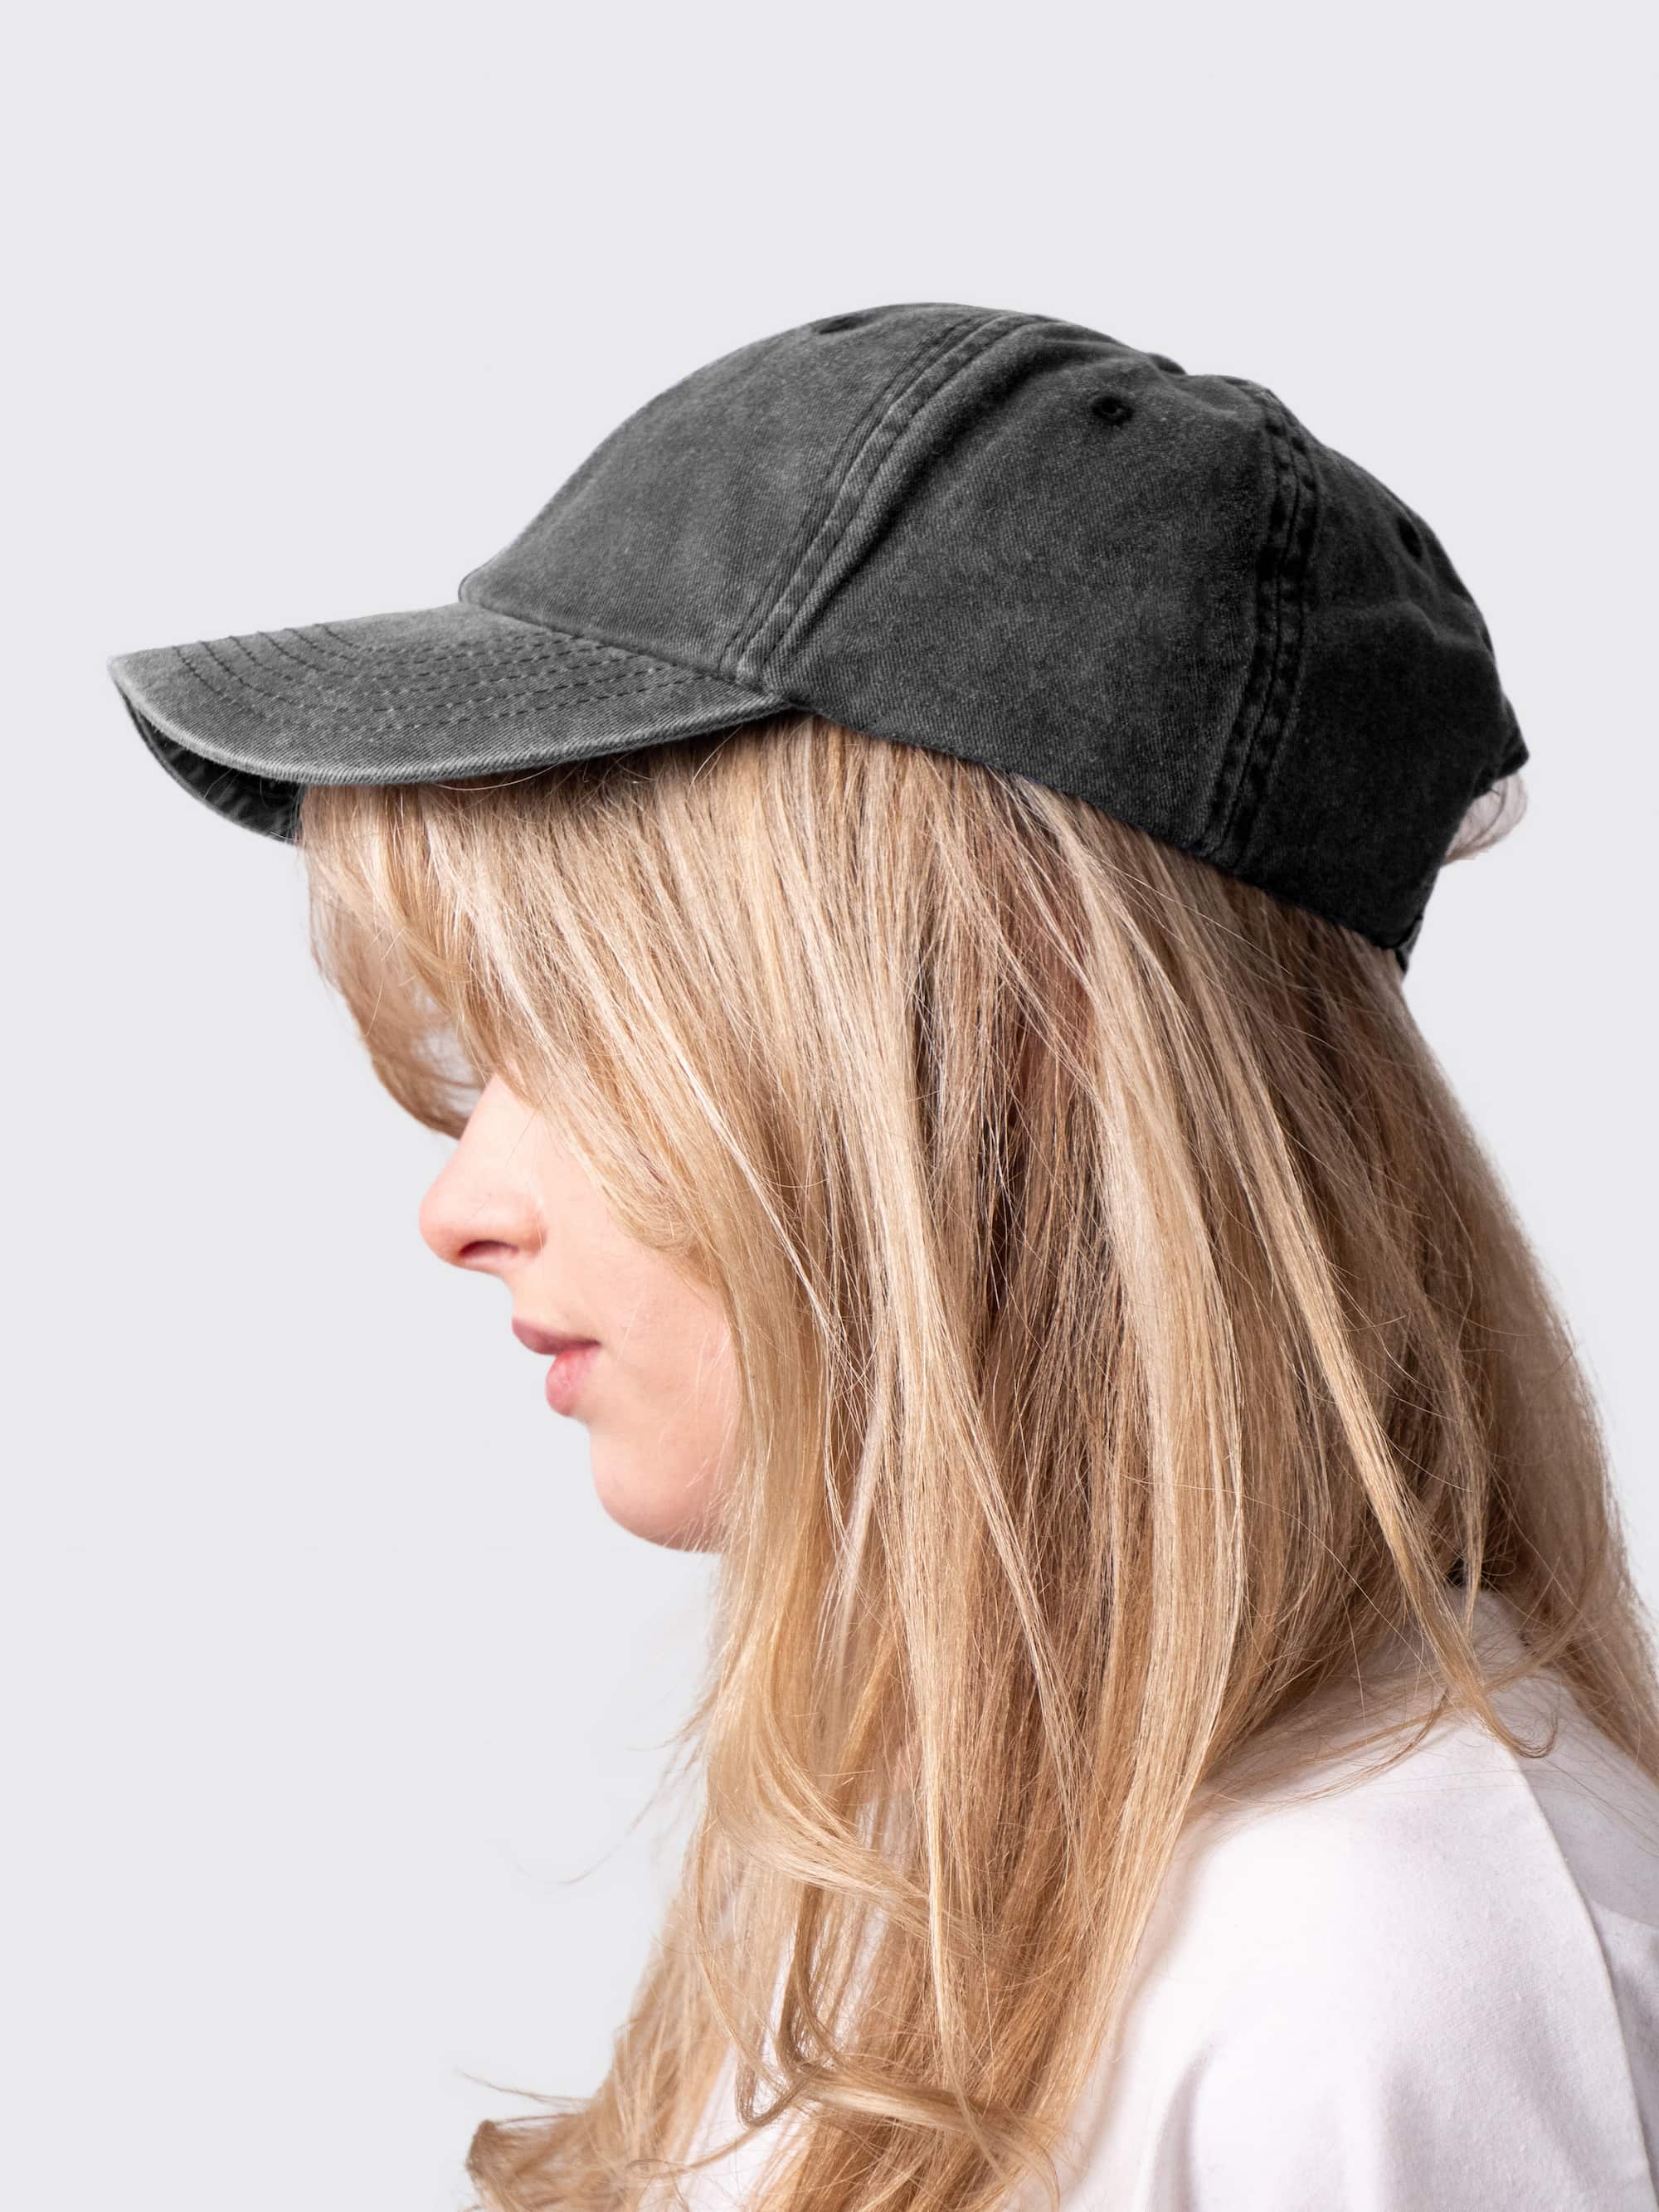 University of Durham washed black cotton cap, with brass buckle